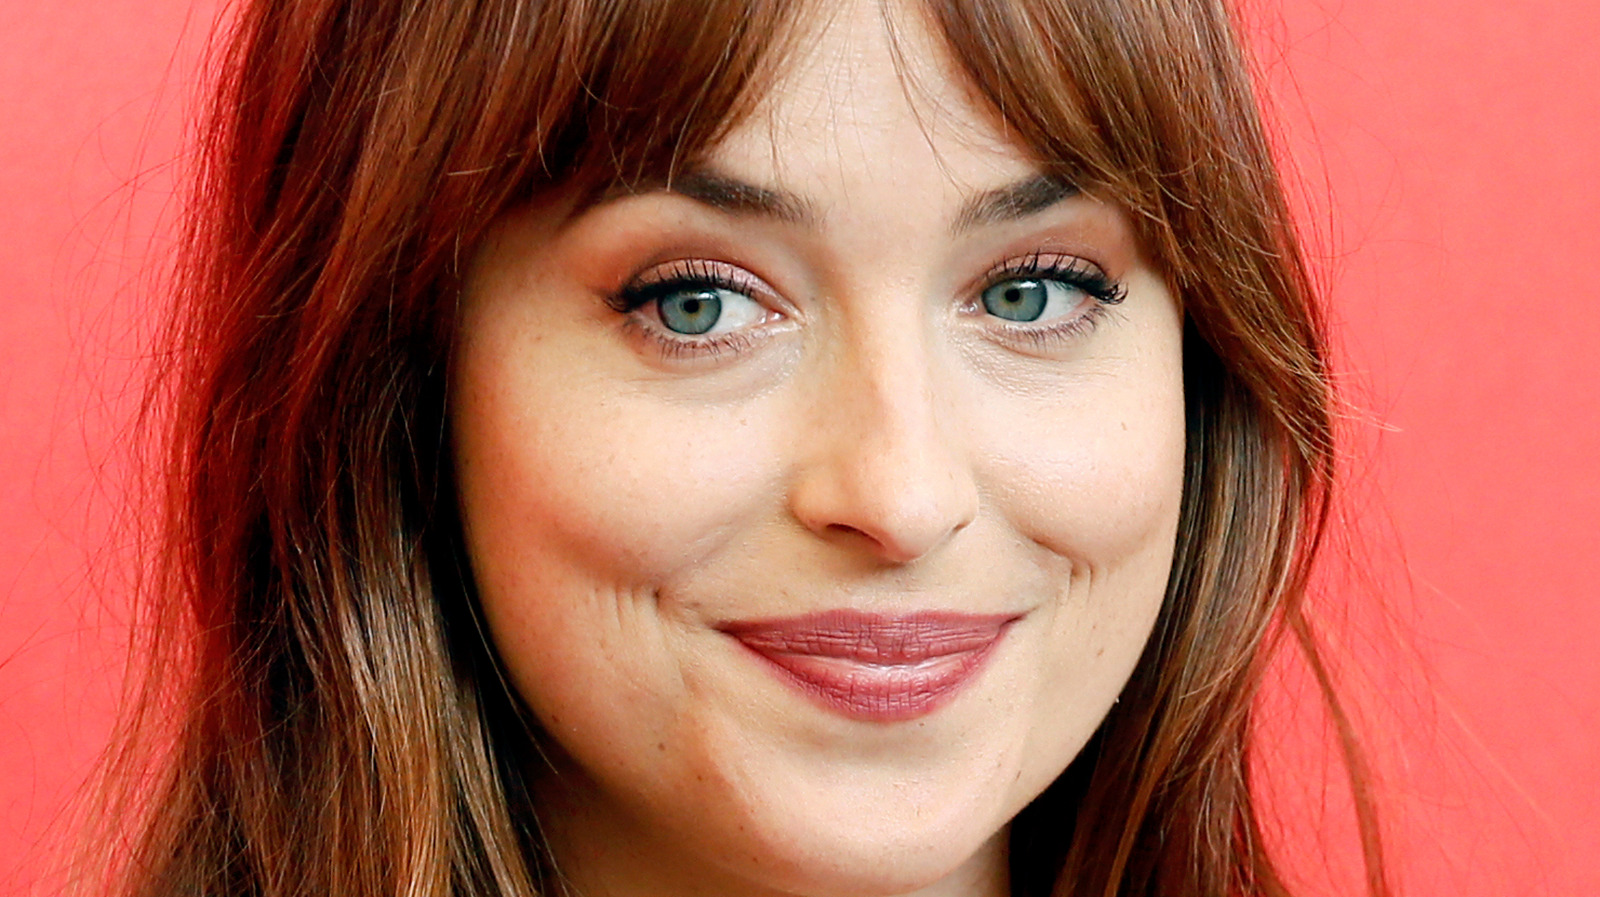 The Actual Lip Color Dakota Johnson Wore As Anastasia In The Fifty Shades  Of Grey Movies